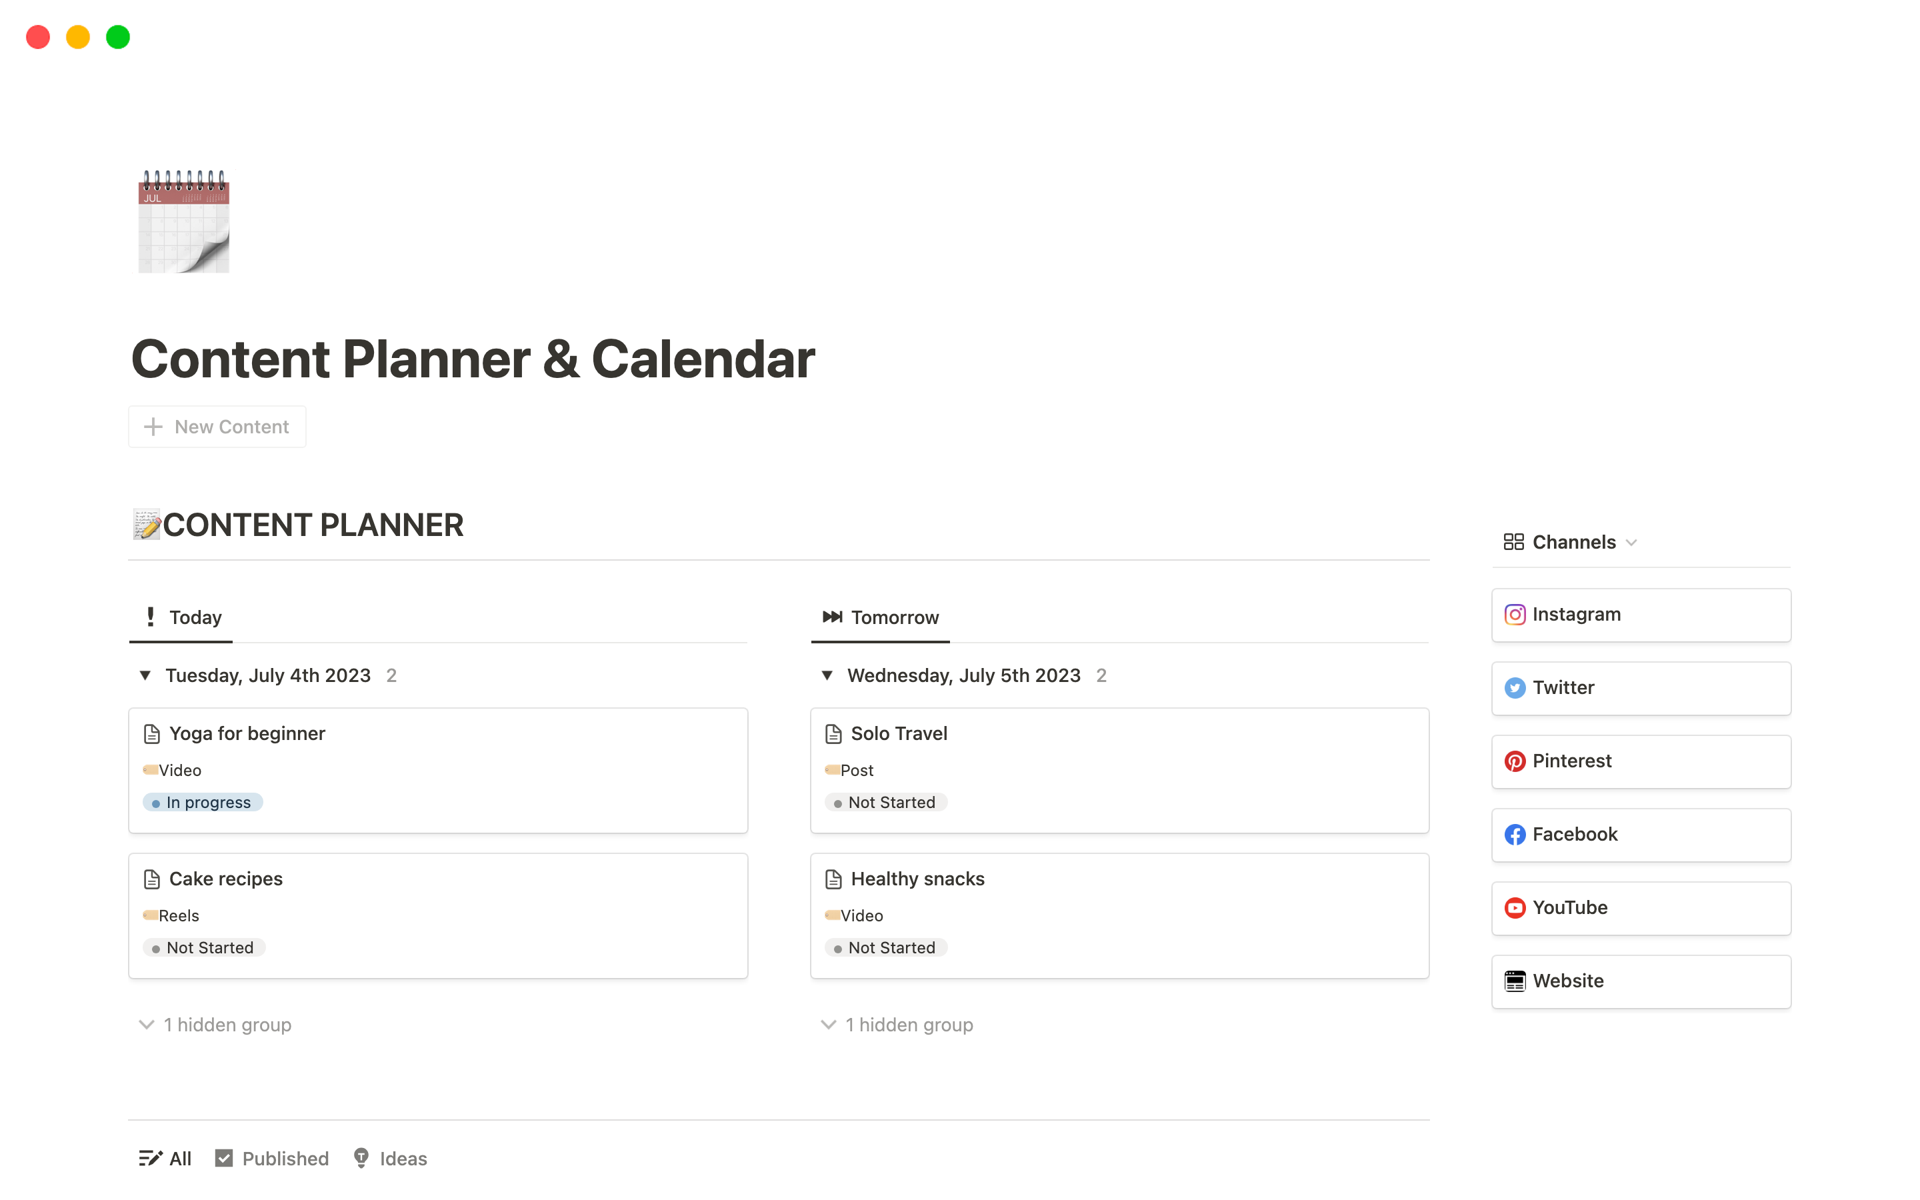 The Content Planner & Calendar template makes the content creation process more efficient that helps you plan and organize content across multiple channels.